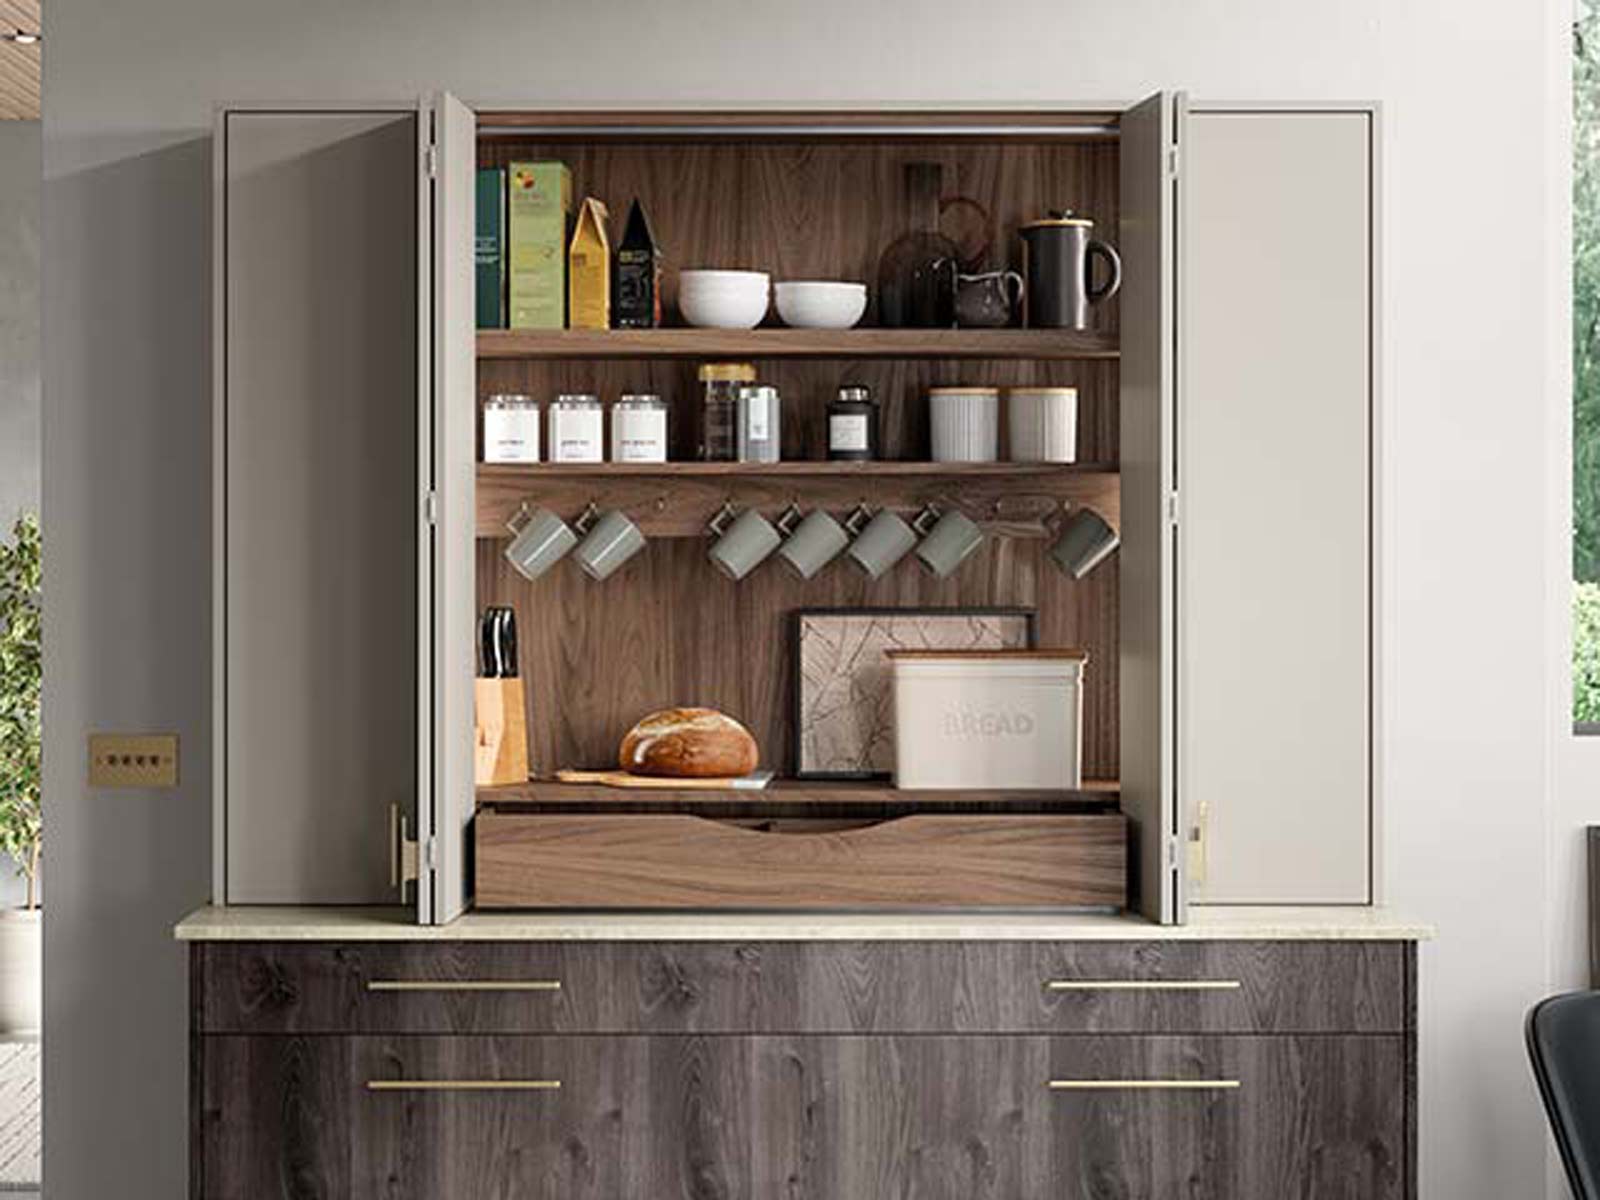 A tea and coffee station in a kitchen breakfast dresser unit with bi-fold doors